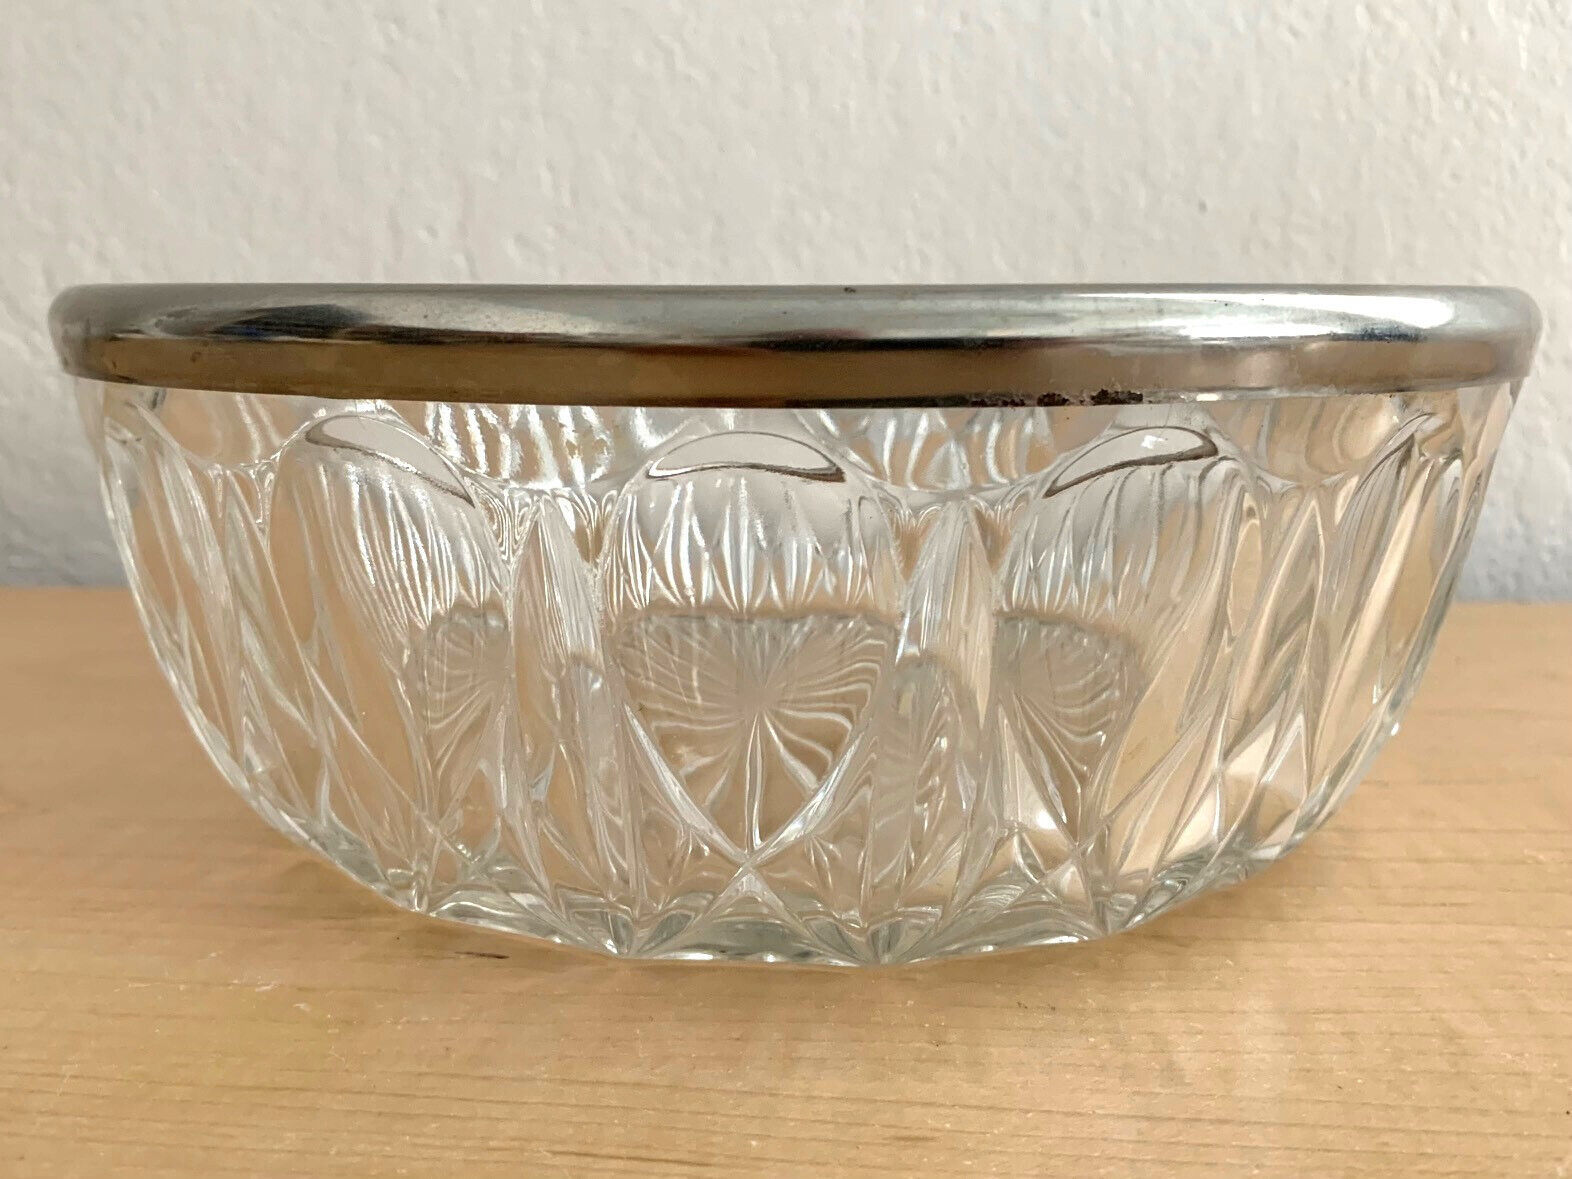 Primary image for Vintage 9" Crystal Bowl with Metal Rim Marked M